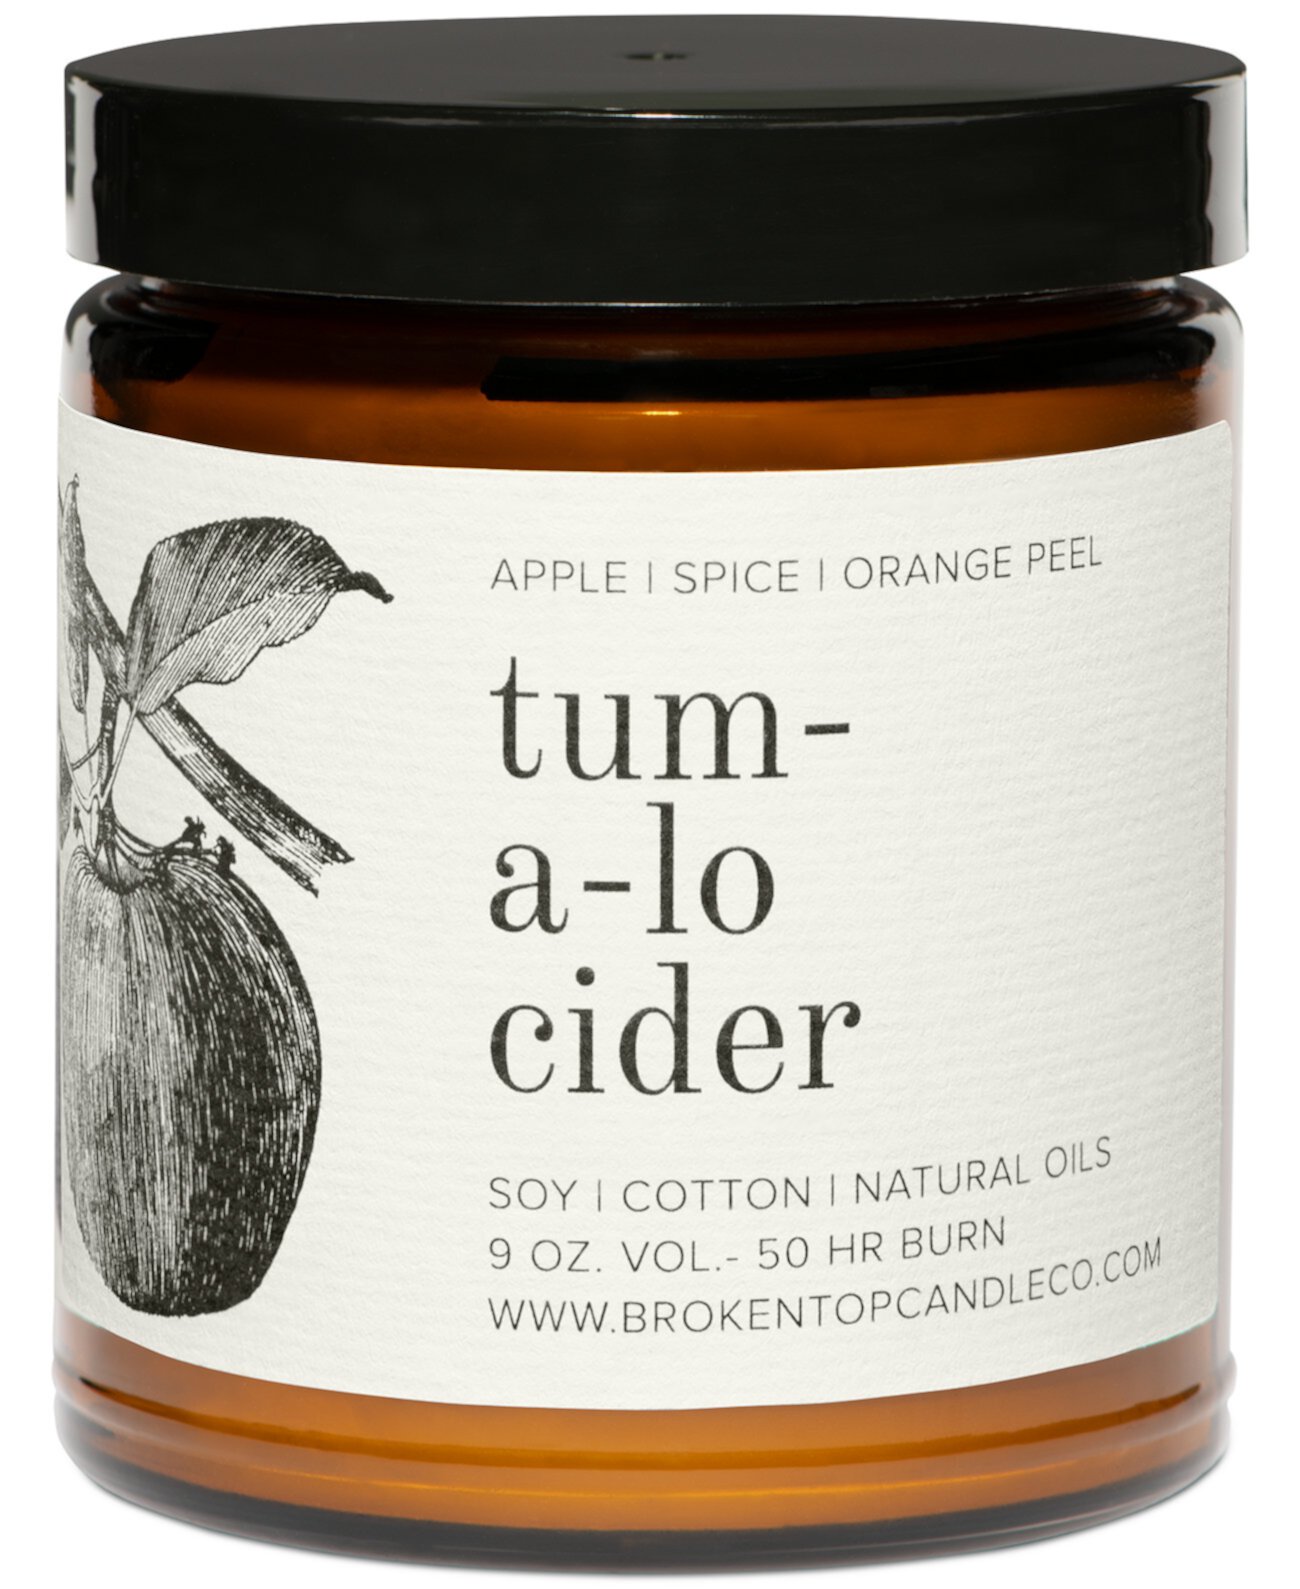 Tumalo Cider Soy Candle, 9 унций. Broken Top Candle Co